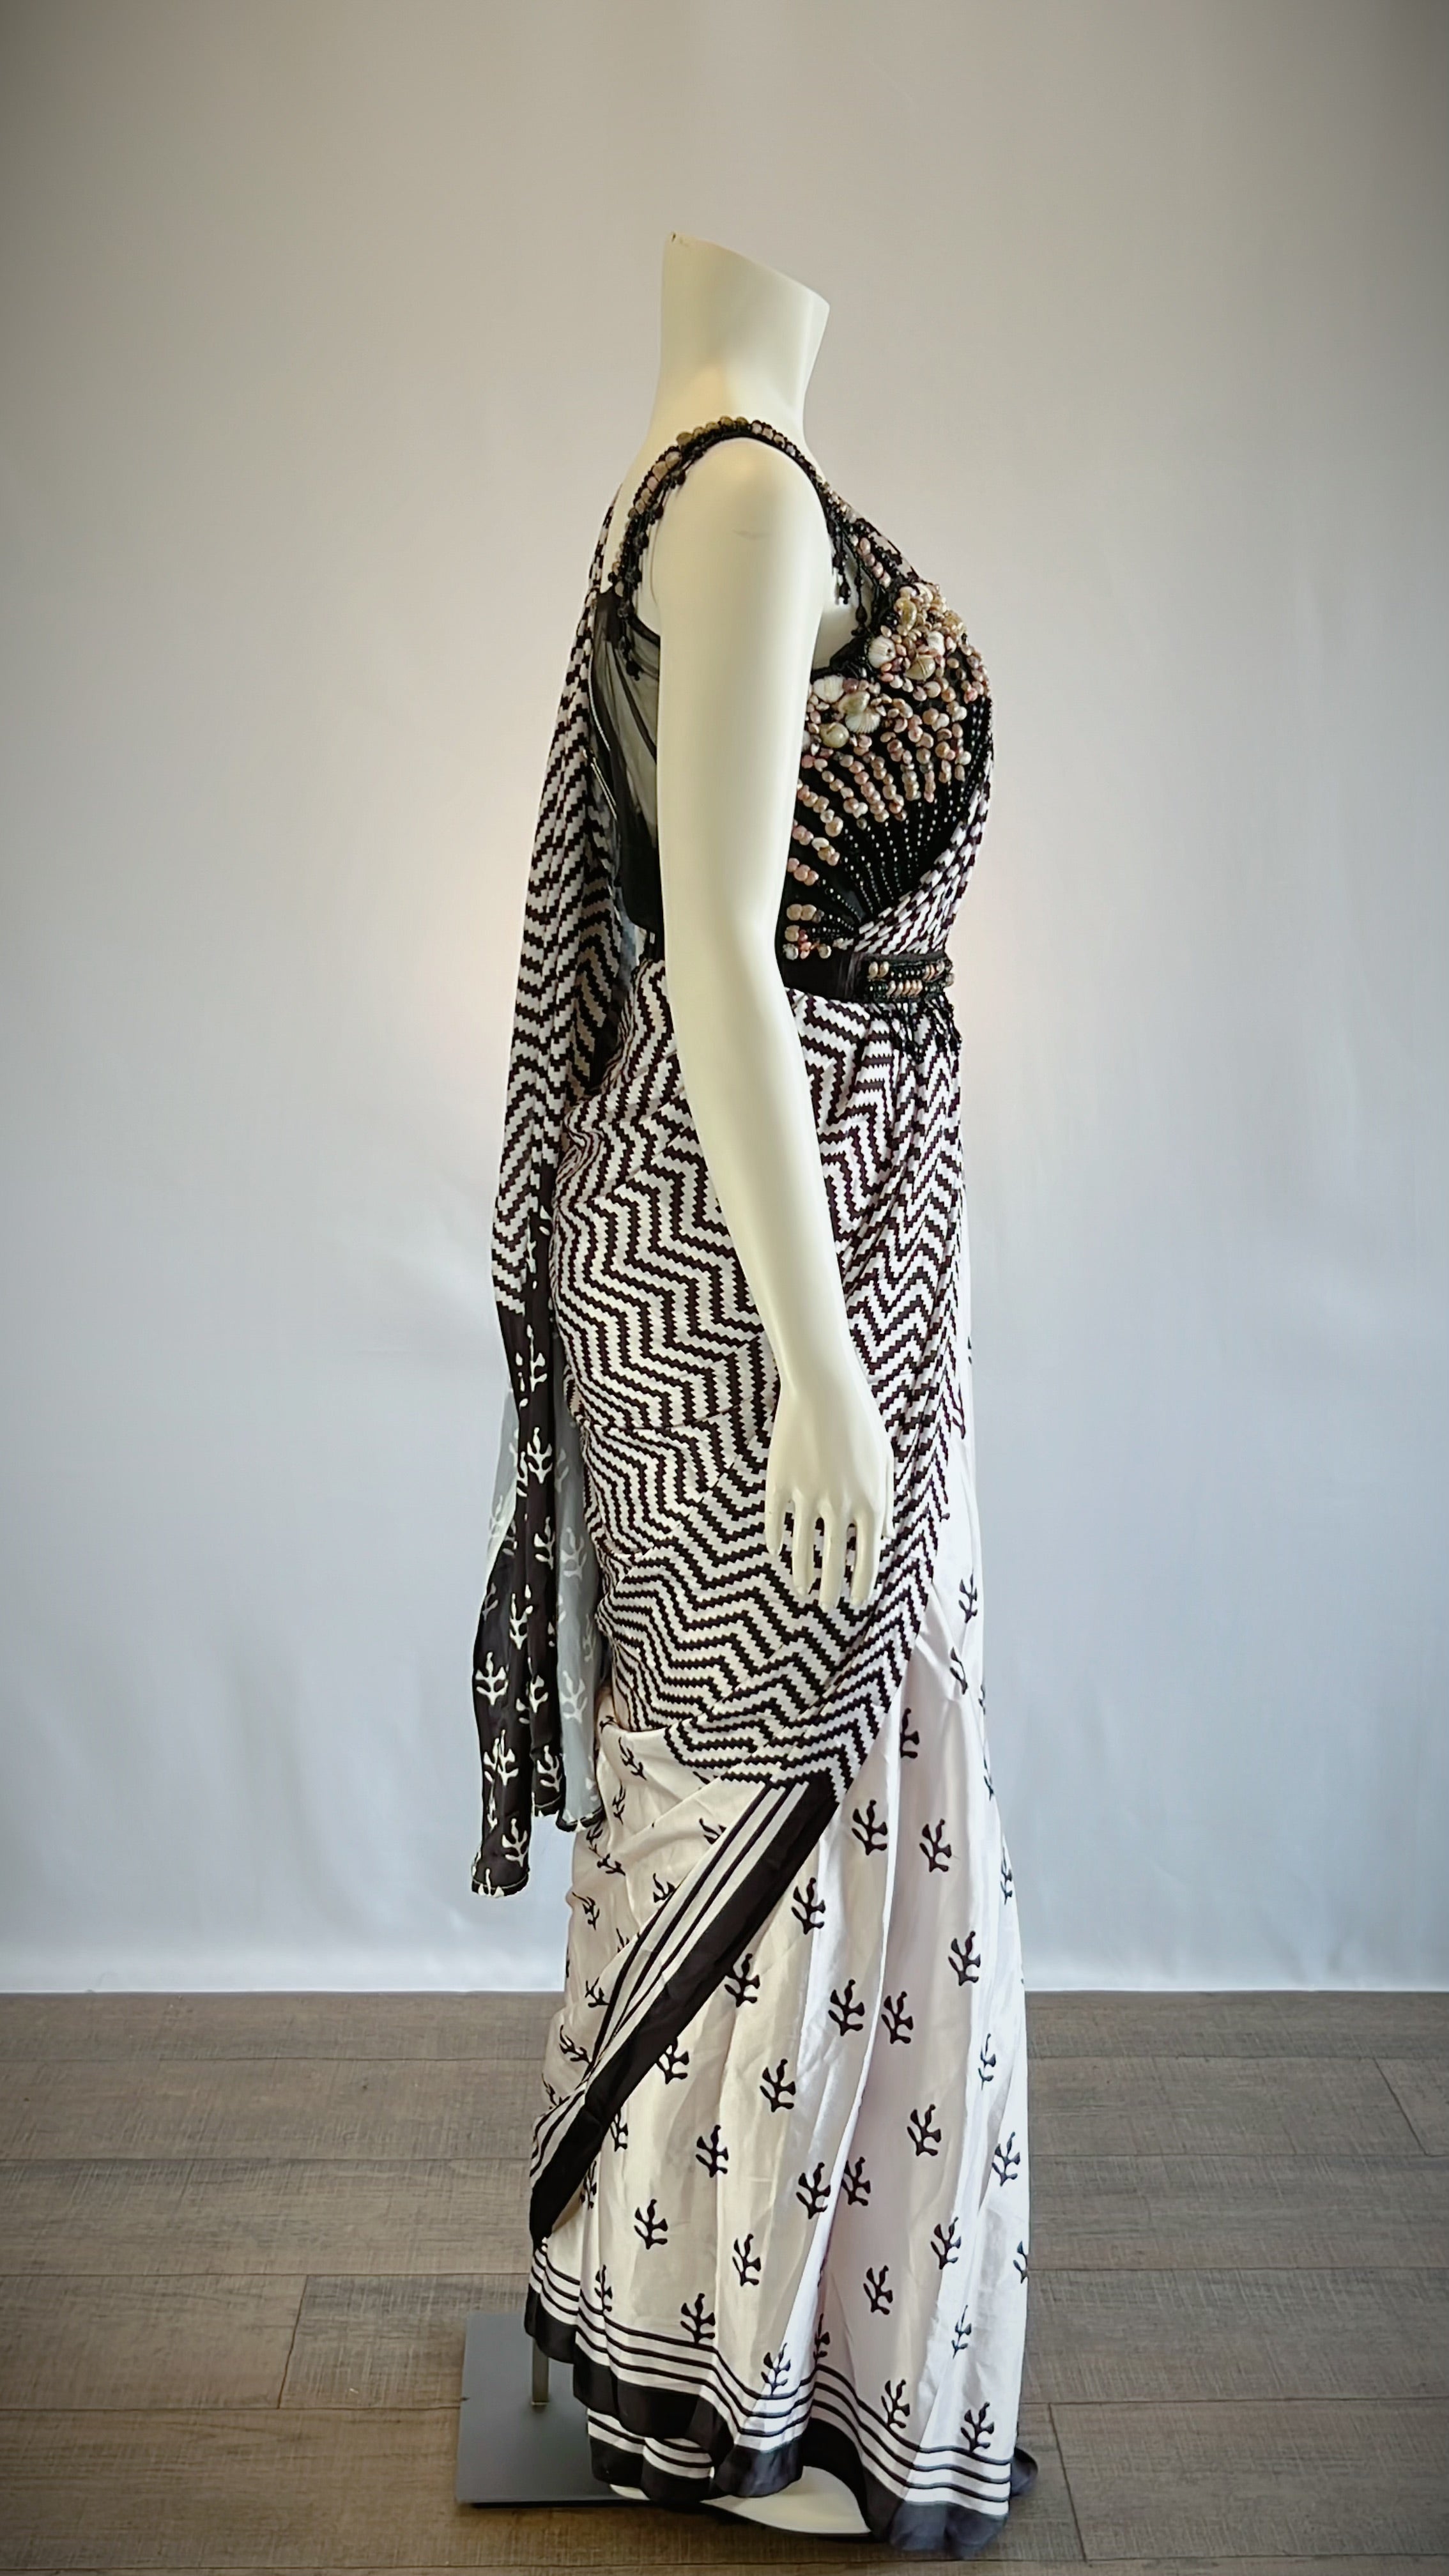 Black and White Printed Satin Silk Pre-Stitched Saree with Seashell Designer Blouse - Elegant Fusion of Patterns | Shop Now